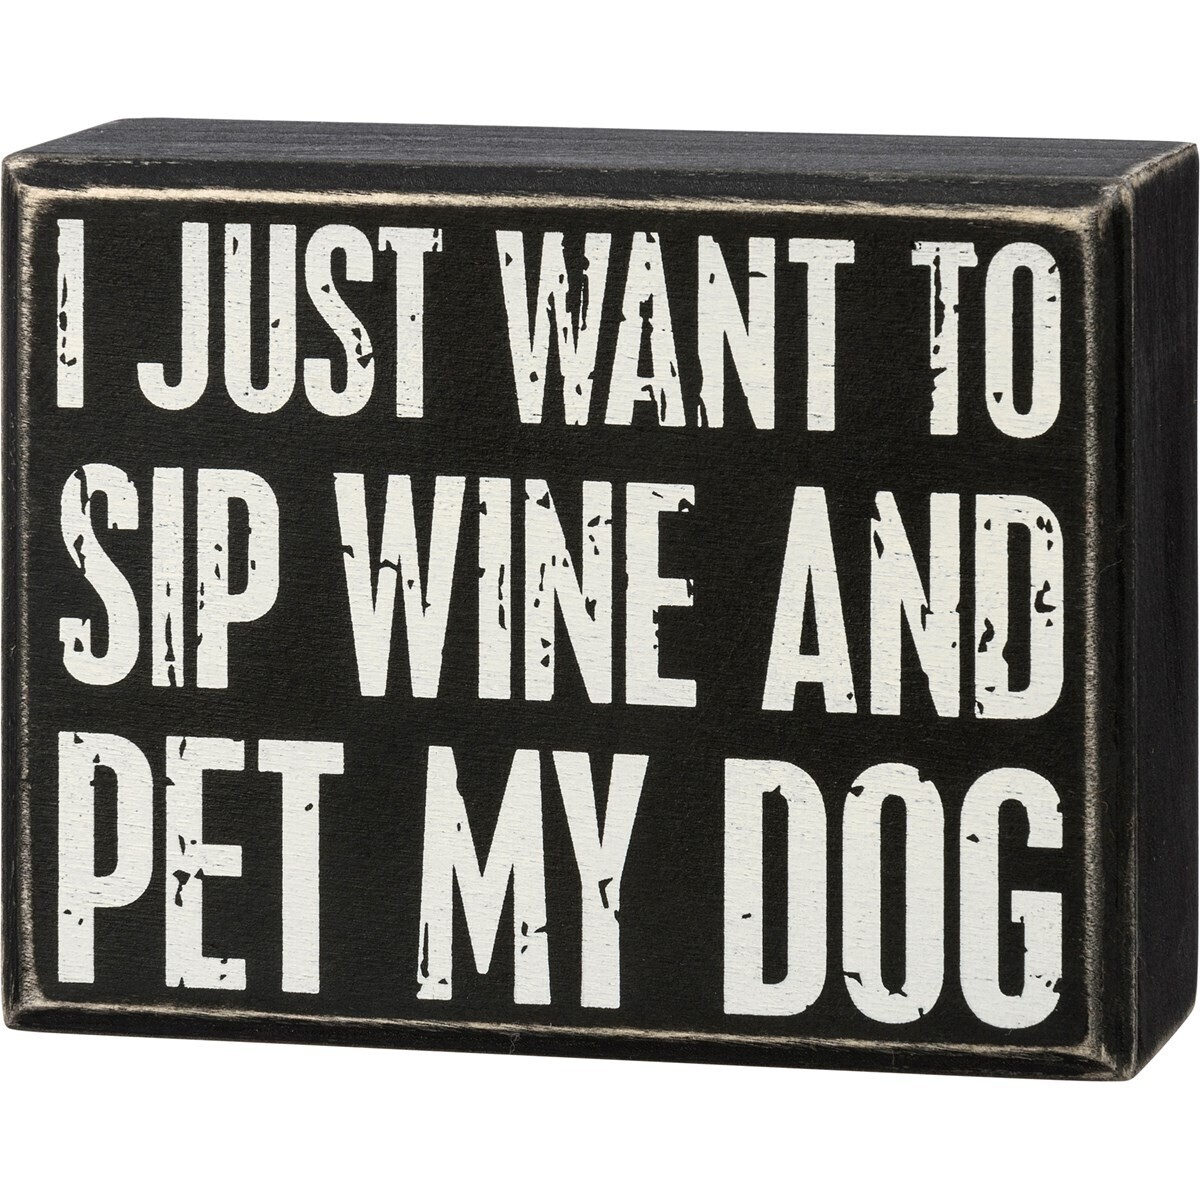 Just Want To Sip Wine And Pet My Dog Box Sign 